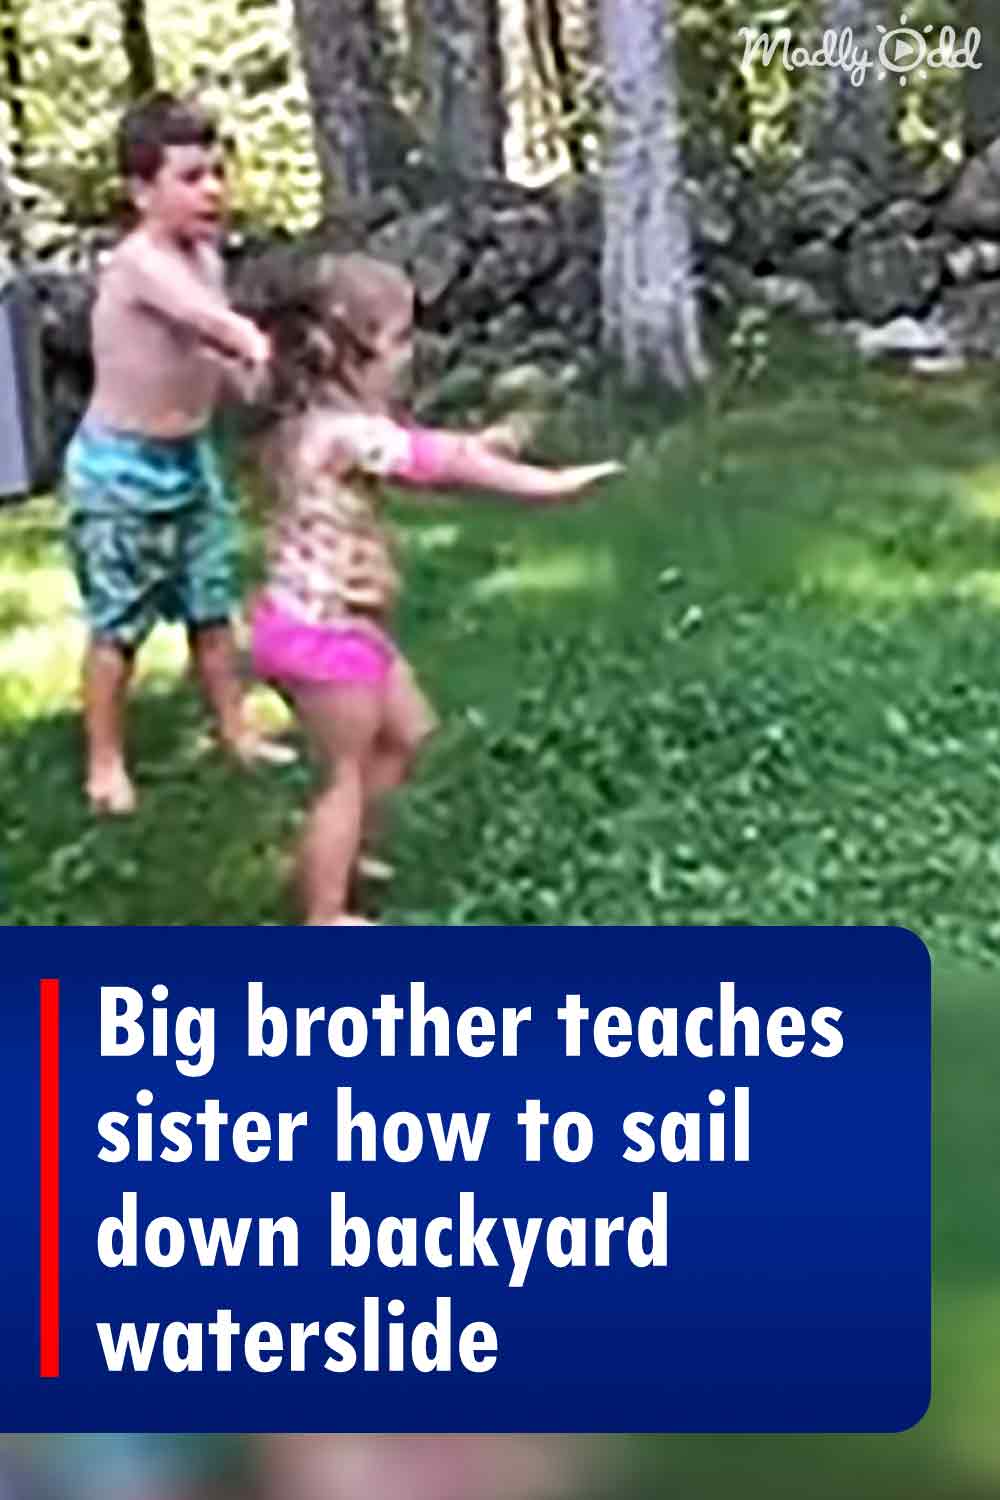 Big brother teaches sister how to sail down backyard waterslide